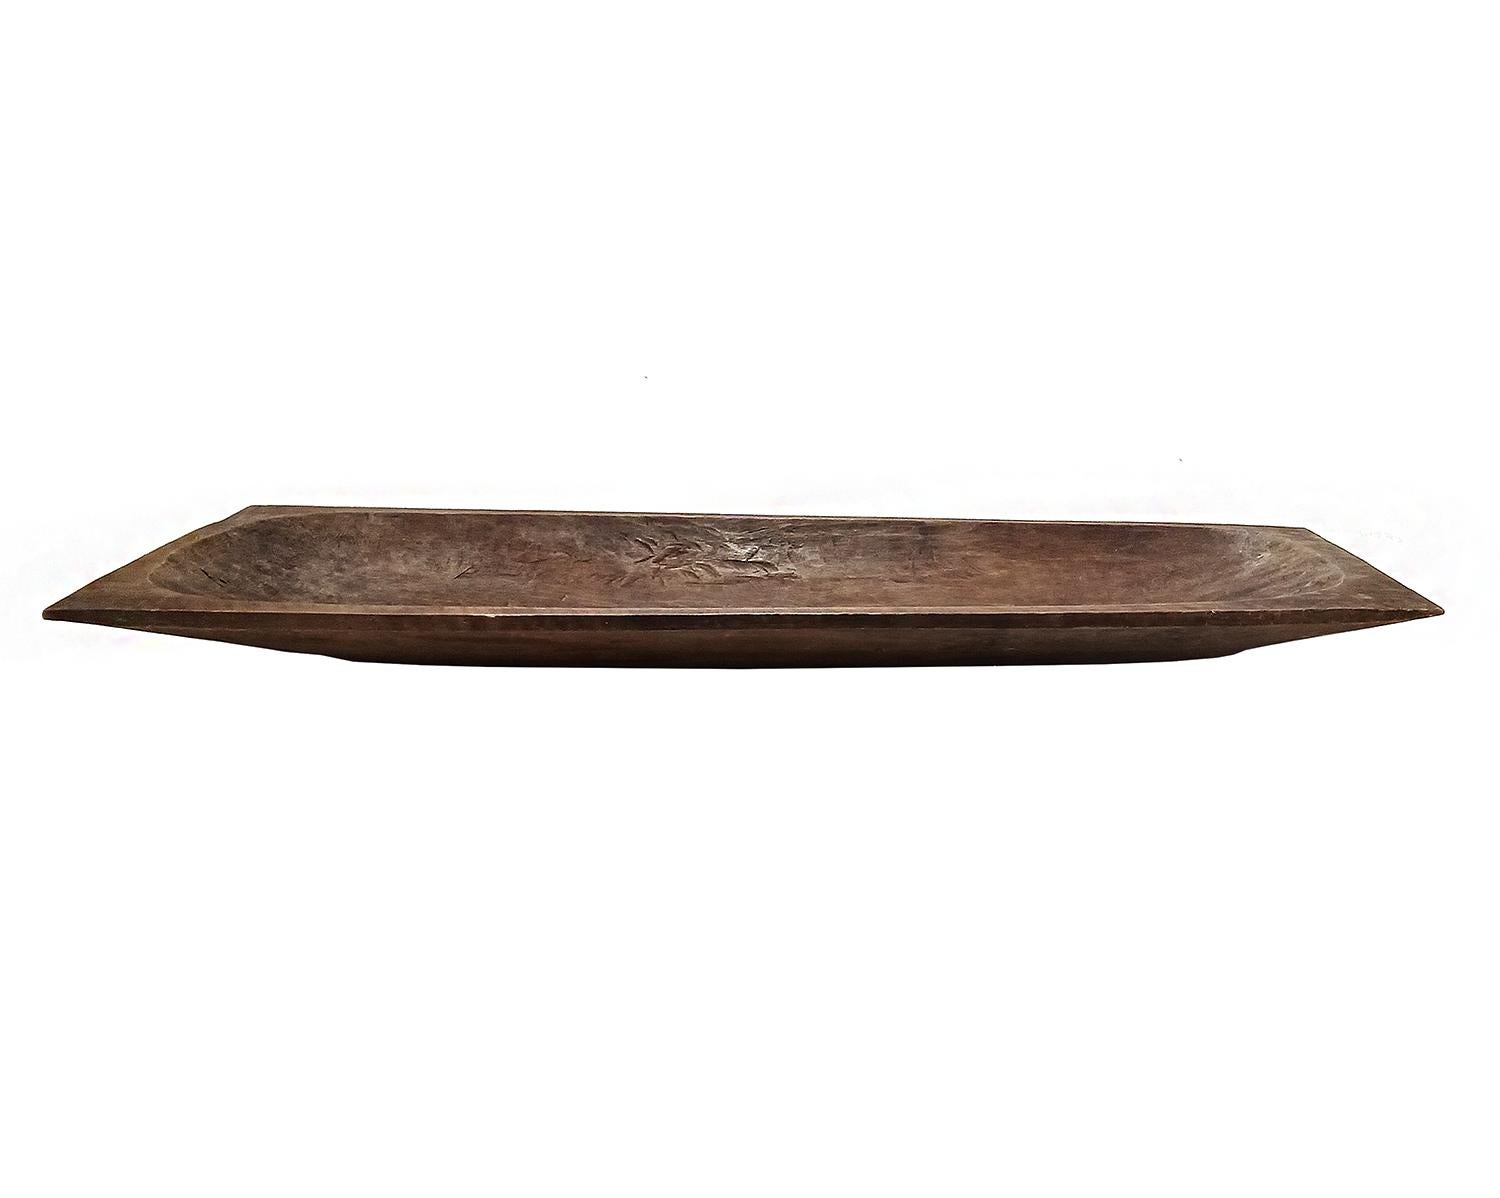 A large rectangular tray, hand-carved in Indonesia out of a single piece of Jackfruit wood. Rounded bottom. Natural color finish. 

41 inches wide, 13 inches deep, 3 inches high. 